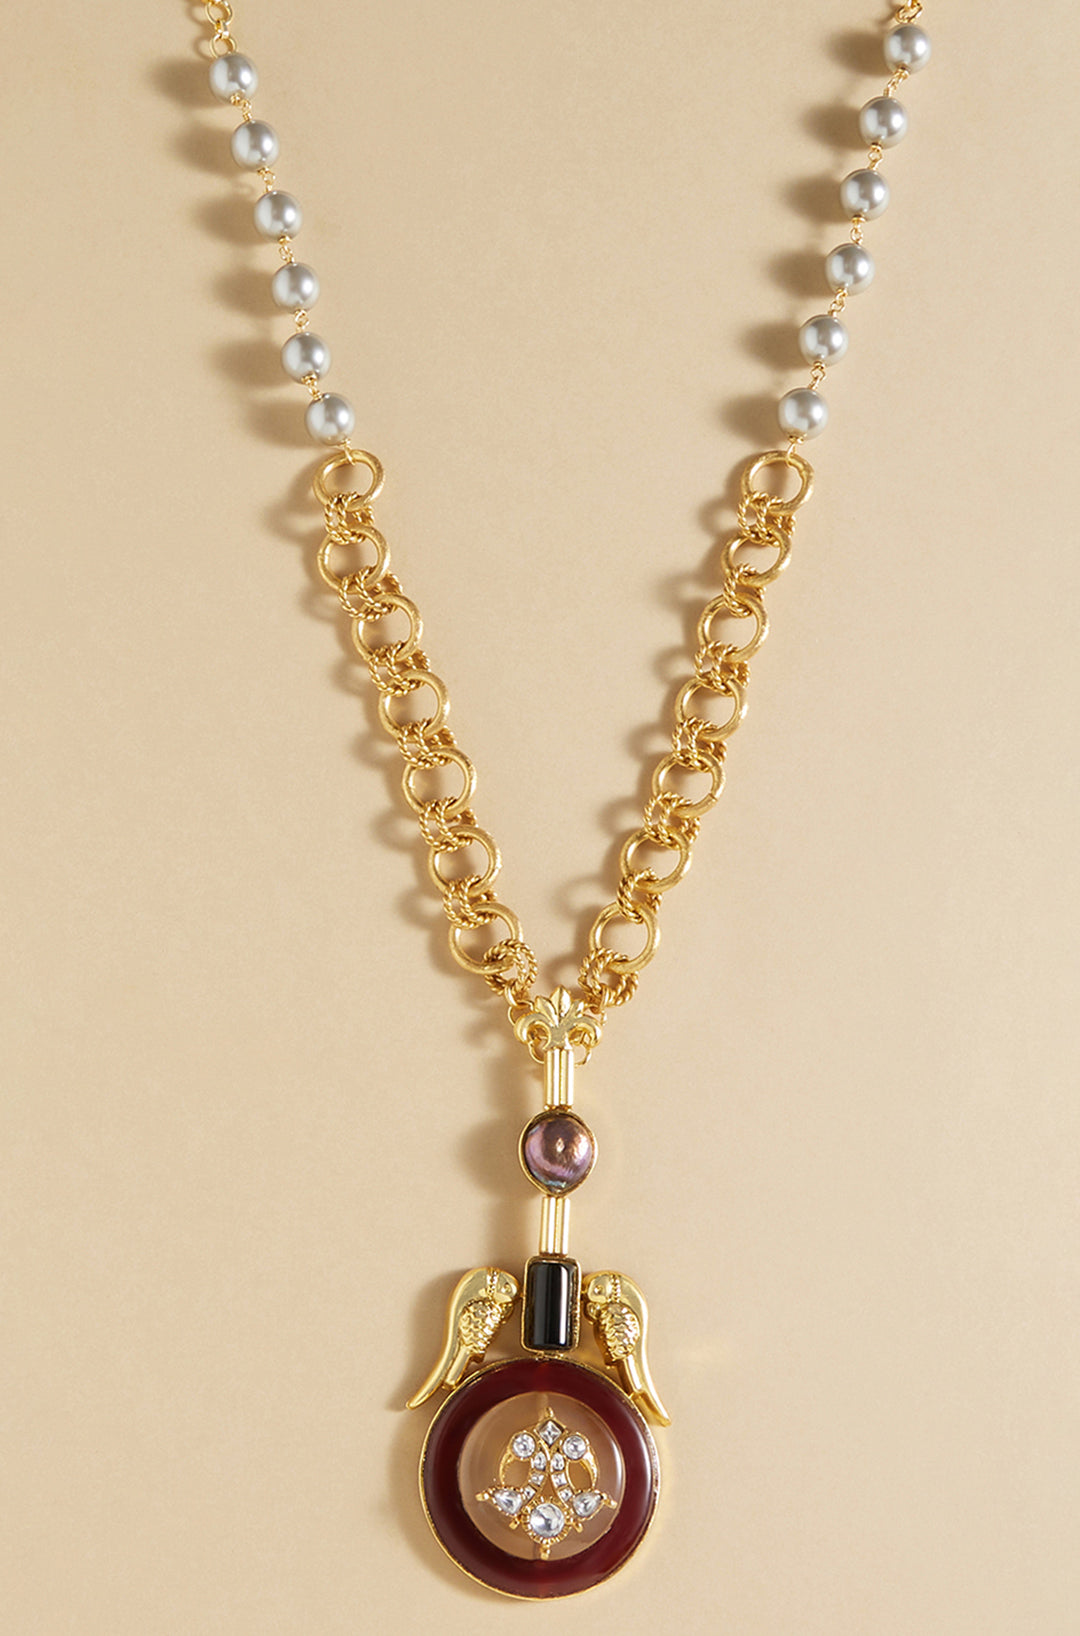 Load image into Gallery viewer, Gold Tone Bespoke Pendant Necklace
